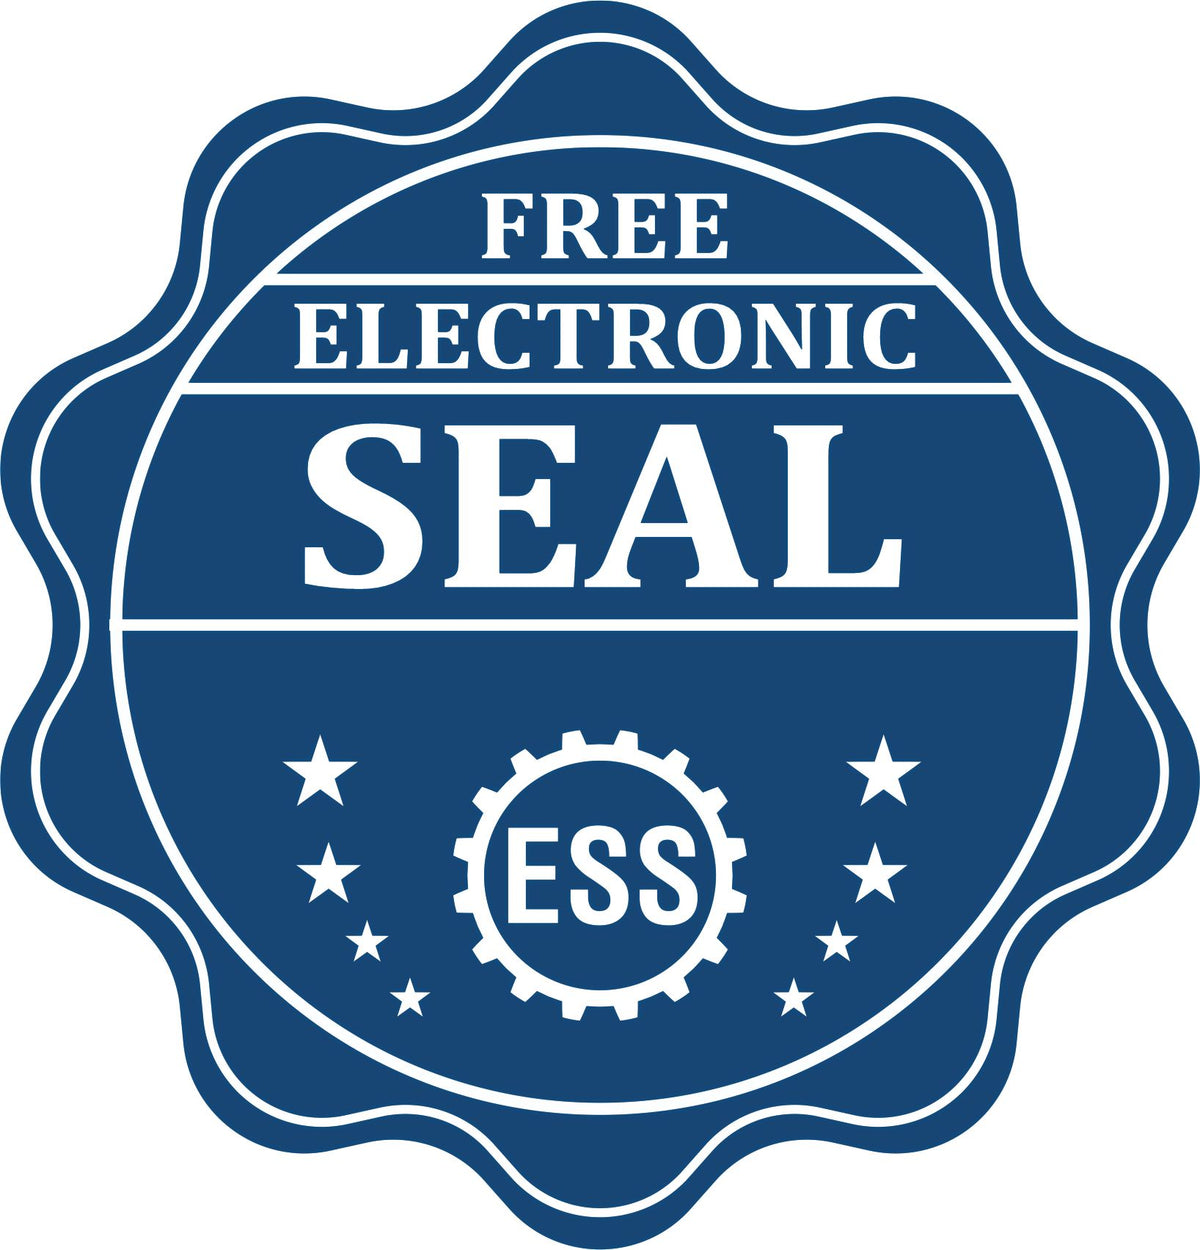 A badge showing a free electronic seal for the Hybrid Wyoming Land Surveyor Seal with stars and the ESS gear on the emblem.